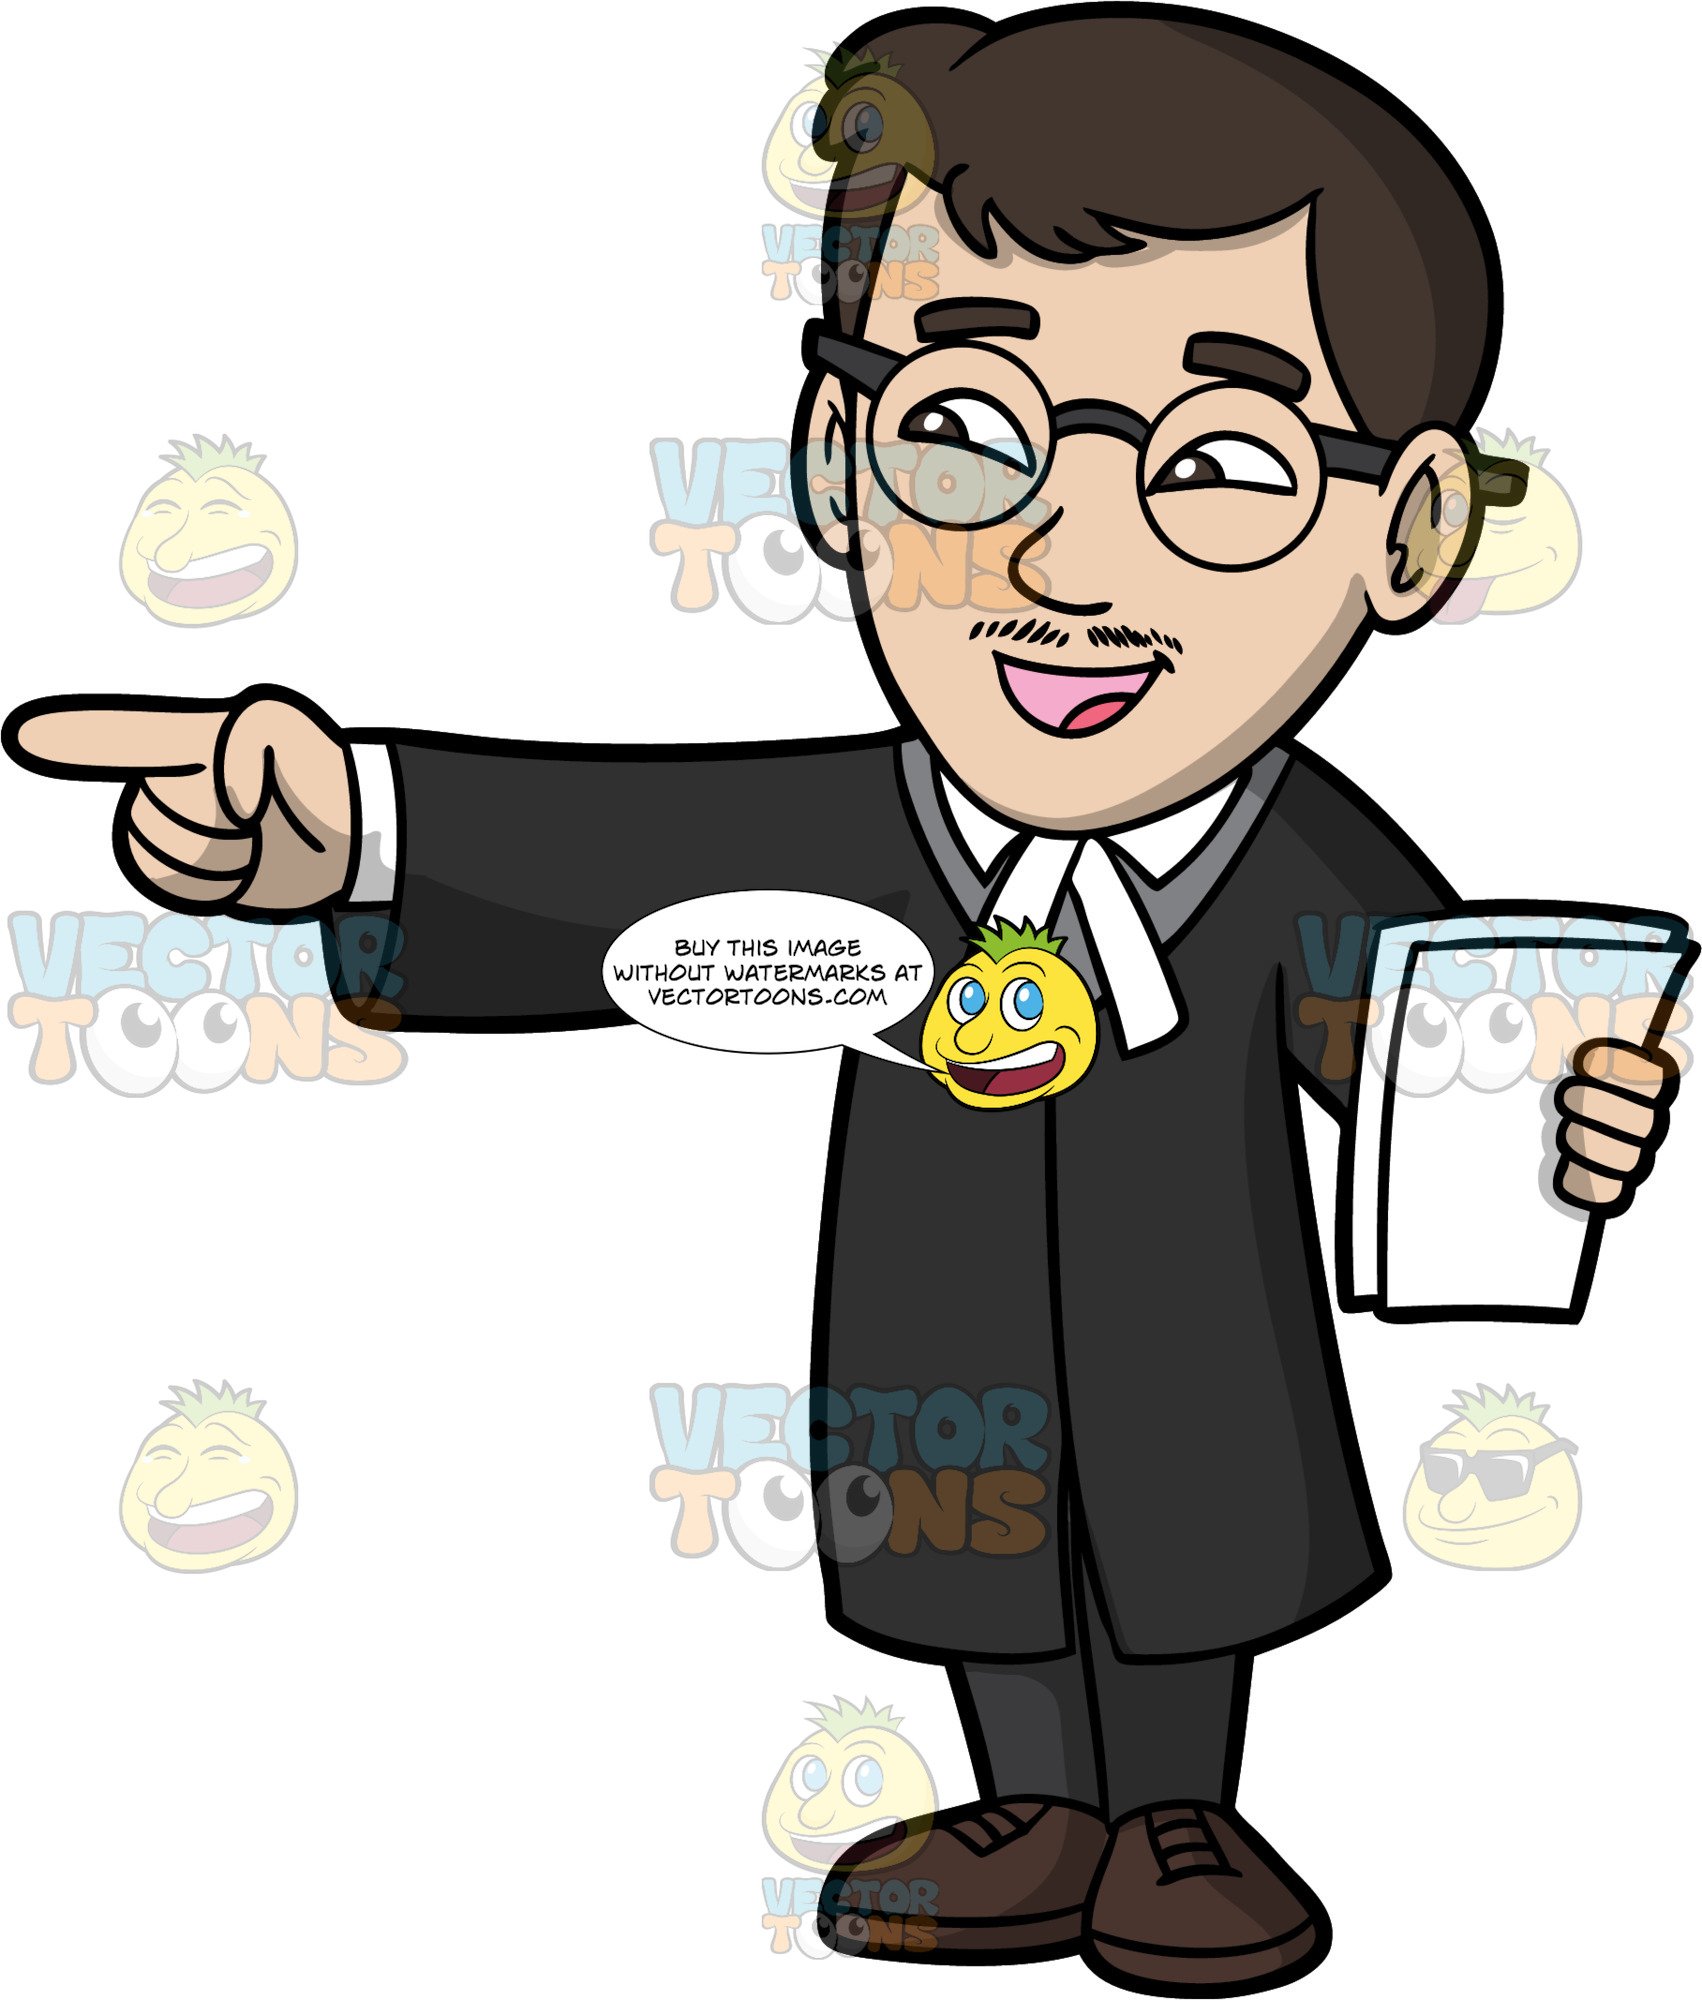 legal clipart male lawyer